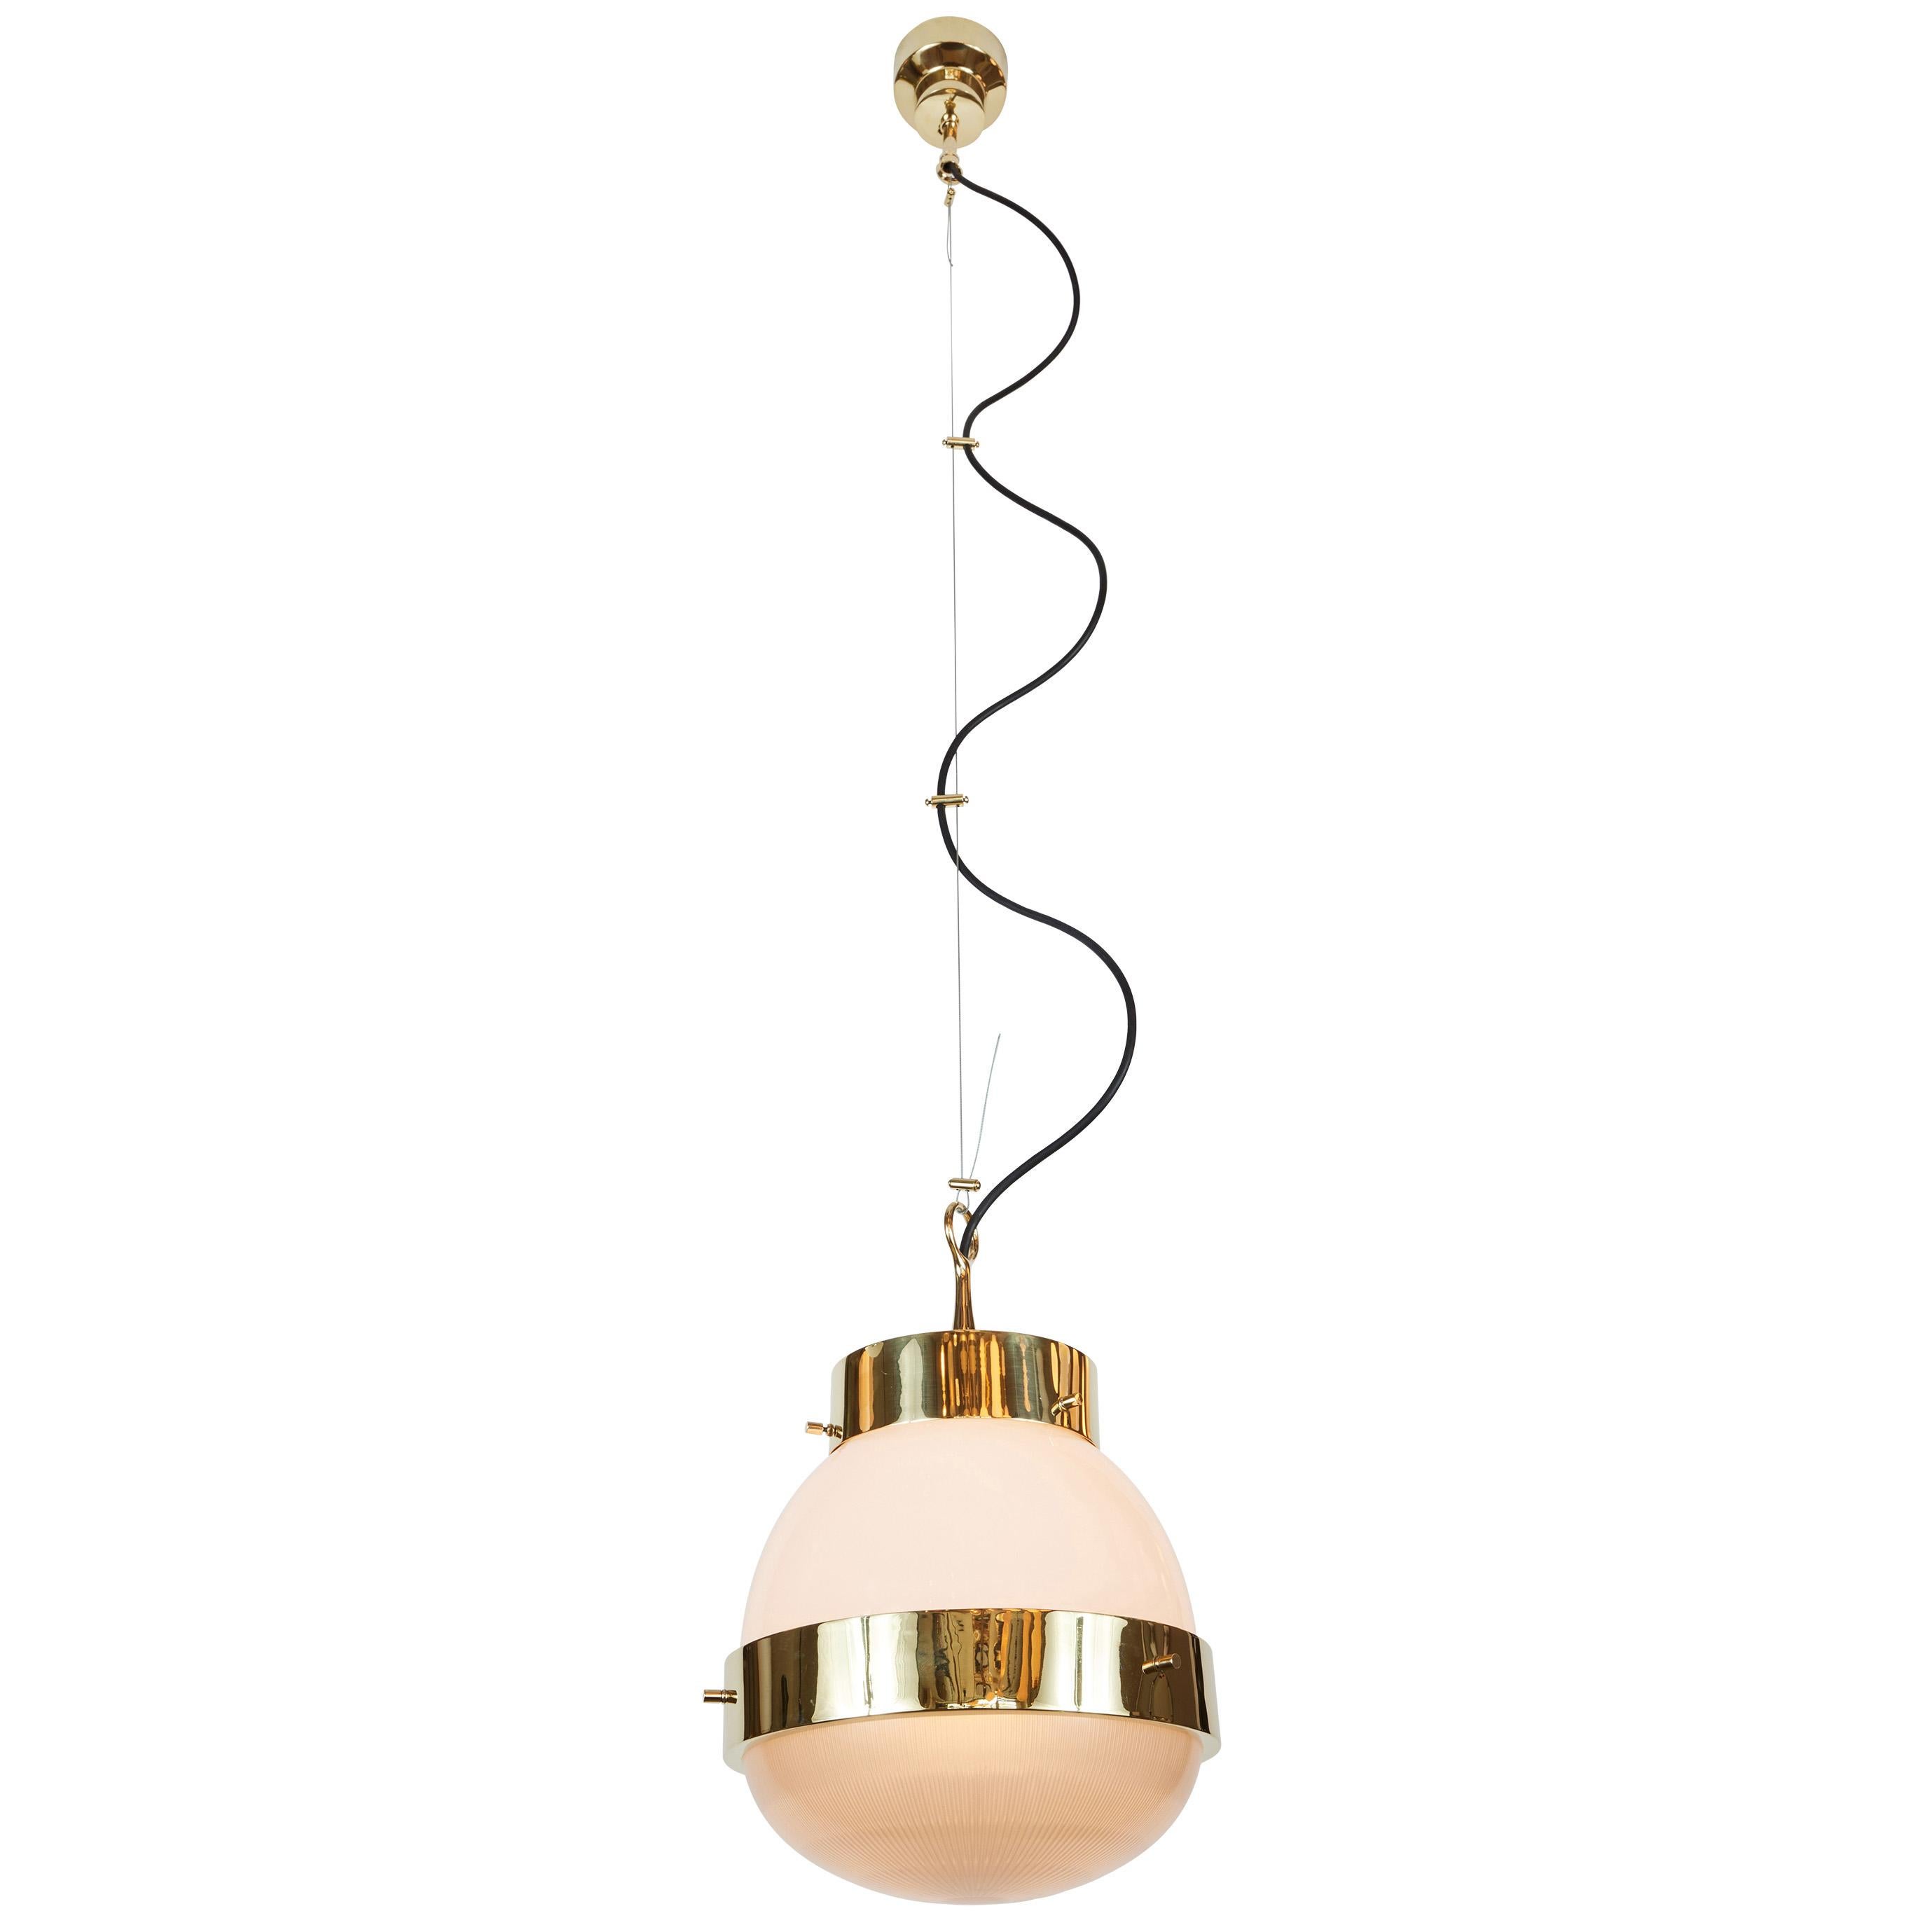 1960s Sergio Mazza 'Delta' pendants for Artmeide. Executed in polished brass, opaline and pressed glass. An incredibly warm and refined design from one of Italy's most illustrious midcentury icons. 

Price is per item. Two lamps available.

Born in